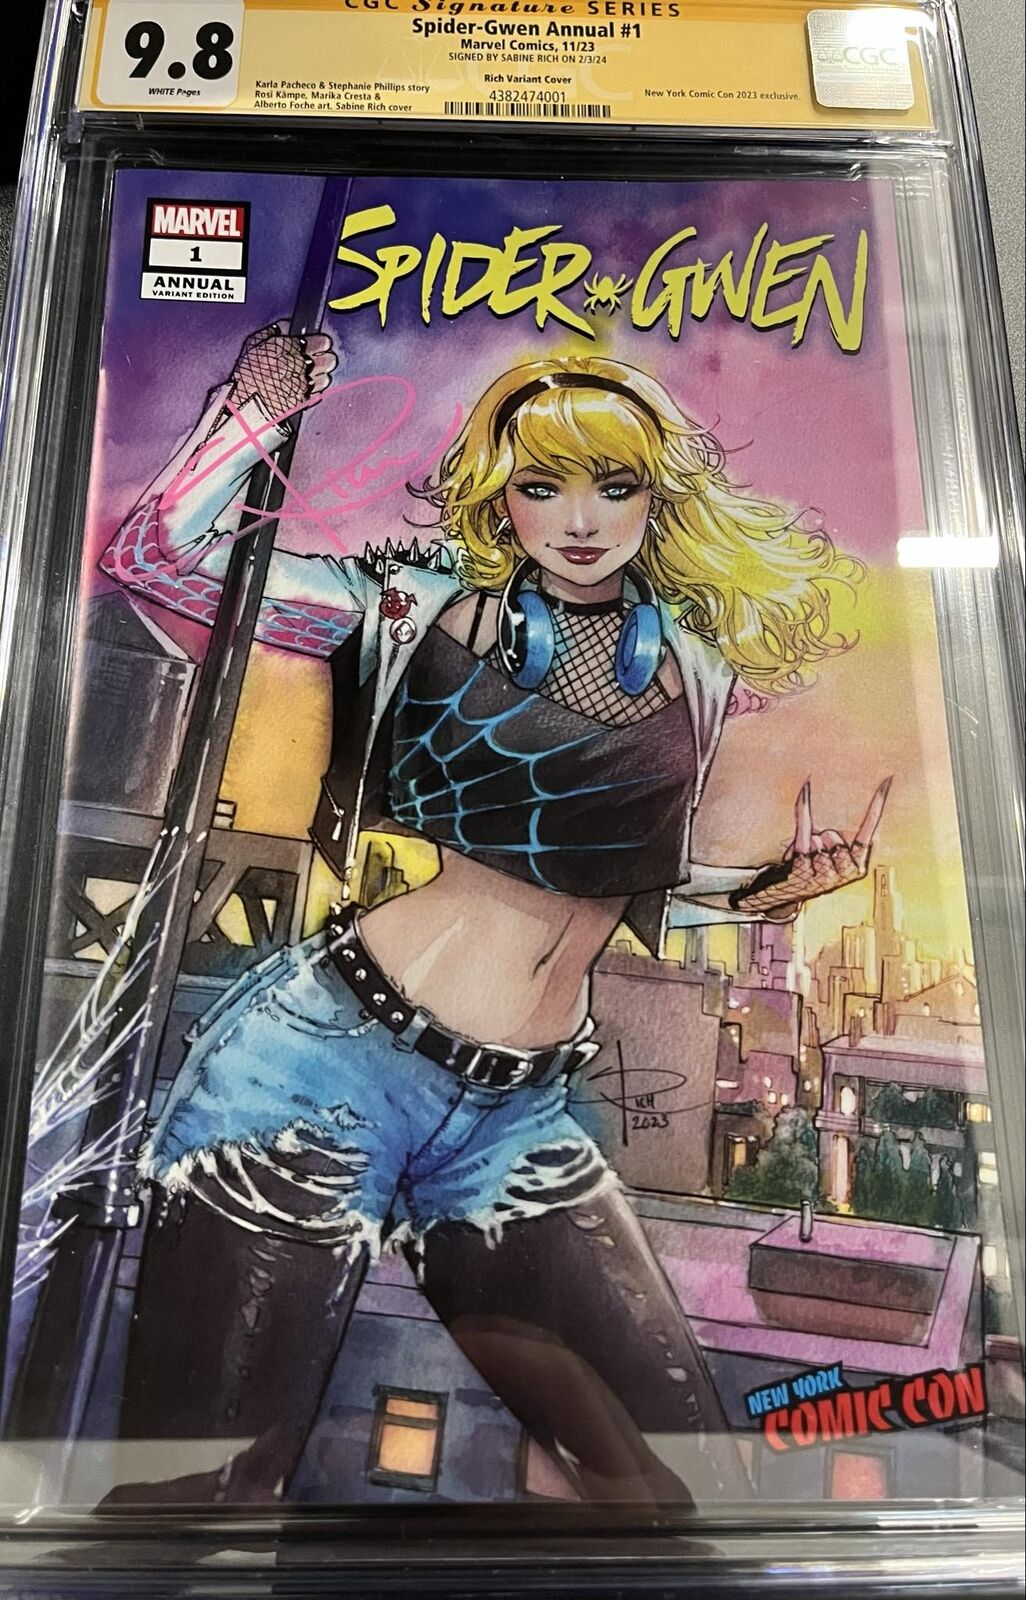 CGC Signature Series 9.8 Spider-Gwen Annual #1 Signed Sabine Rich Variant Cover